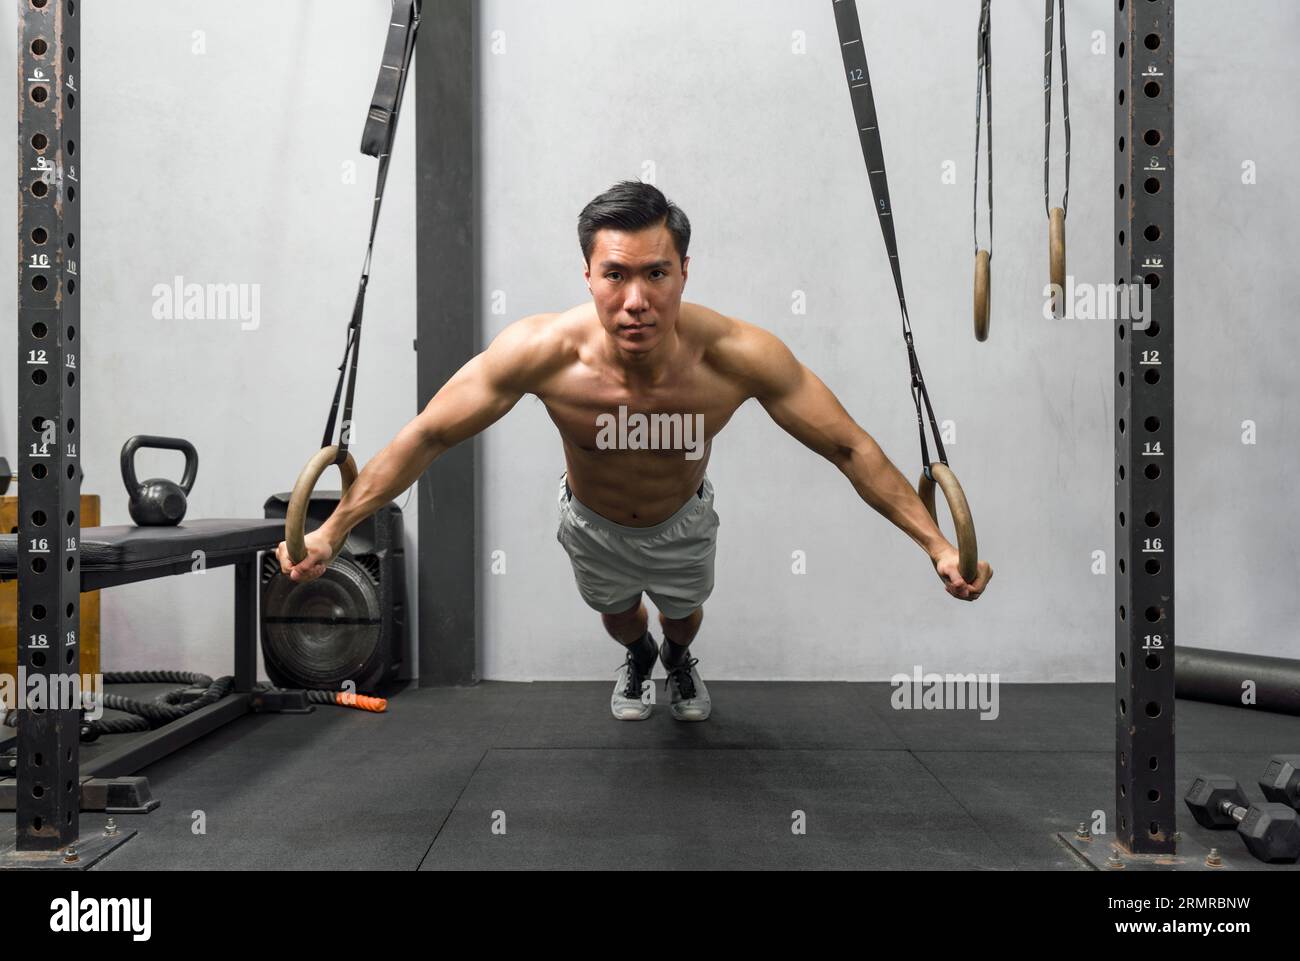 Athlete exercising on gymnastic rings in a well-equipped, modern gym. The man displays strength and determination, his muscles ripple with exertion. Stock Photo